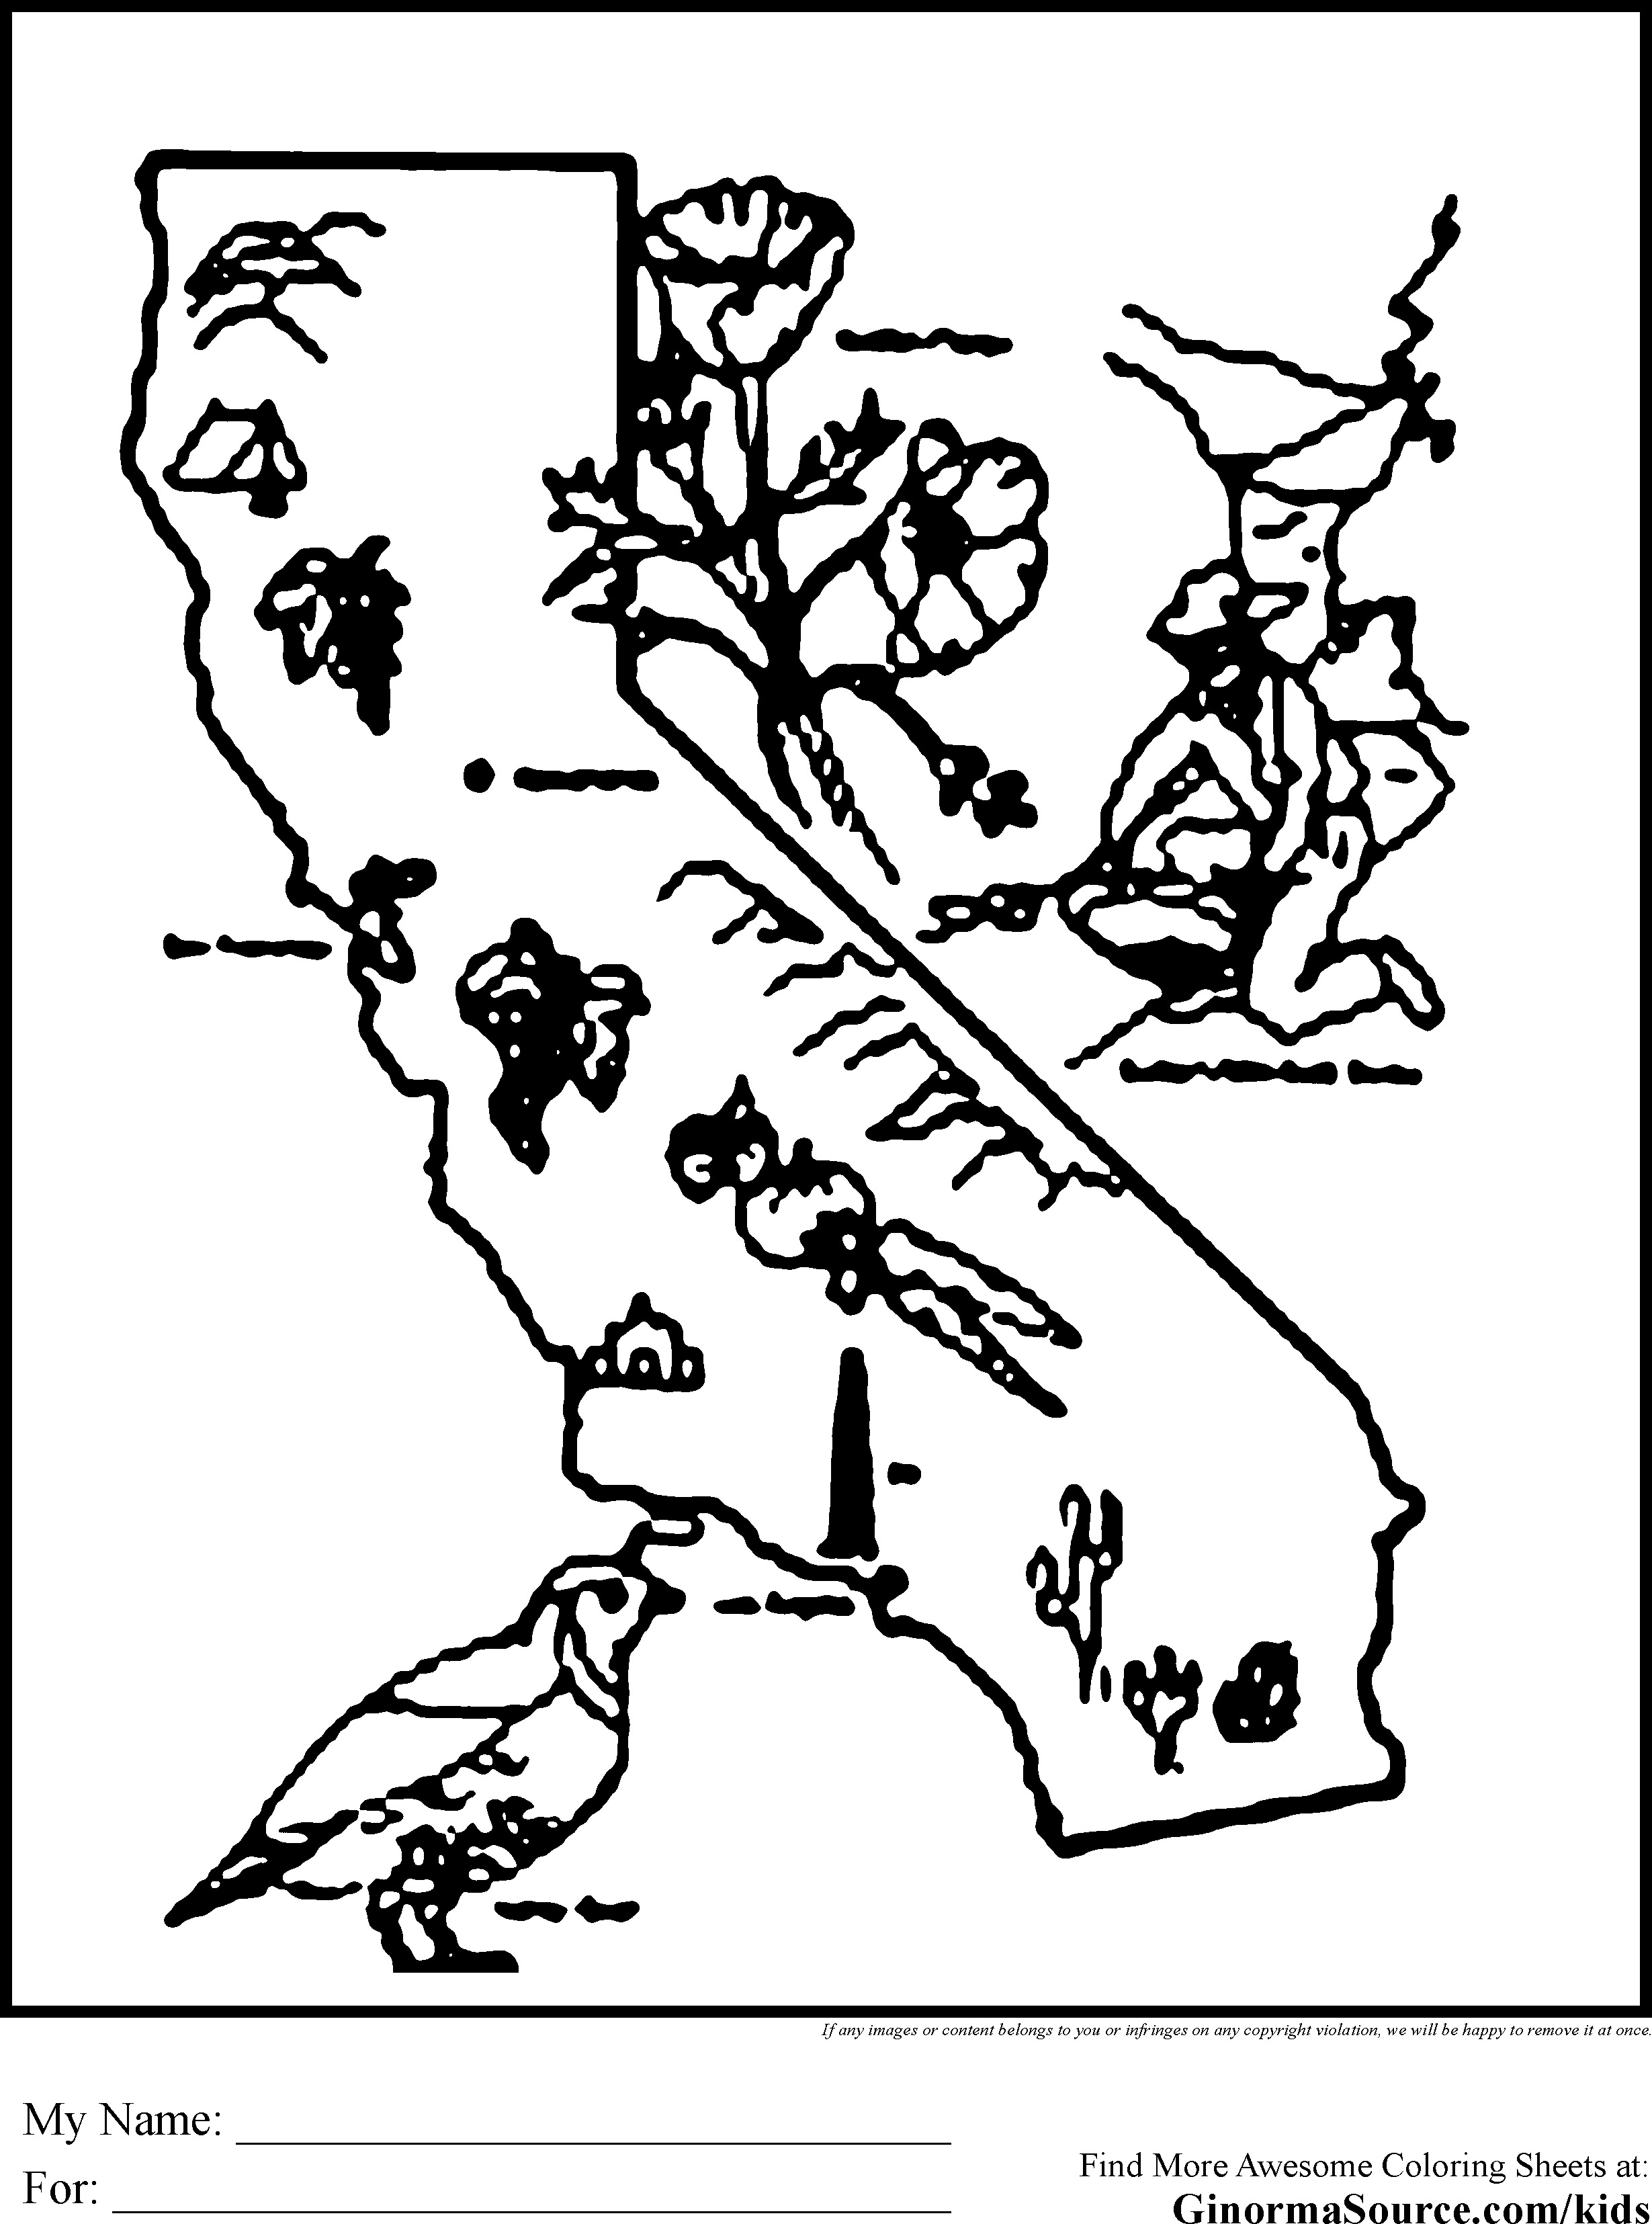 California Republic Coloring Pages | Coloring Pages For All Ages